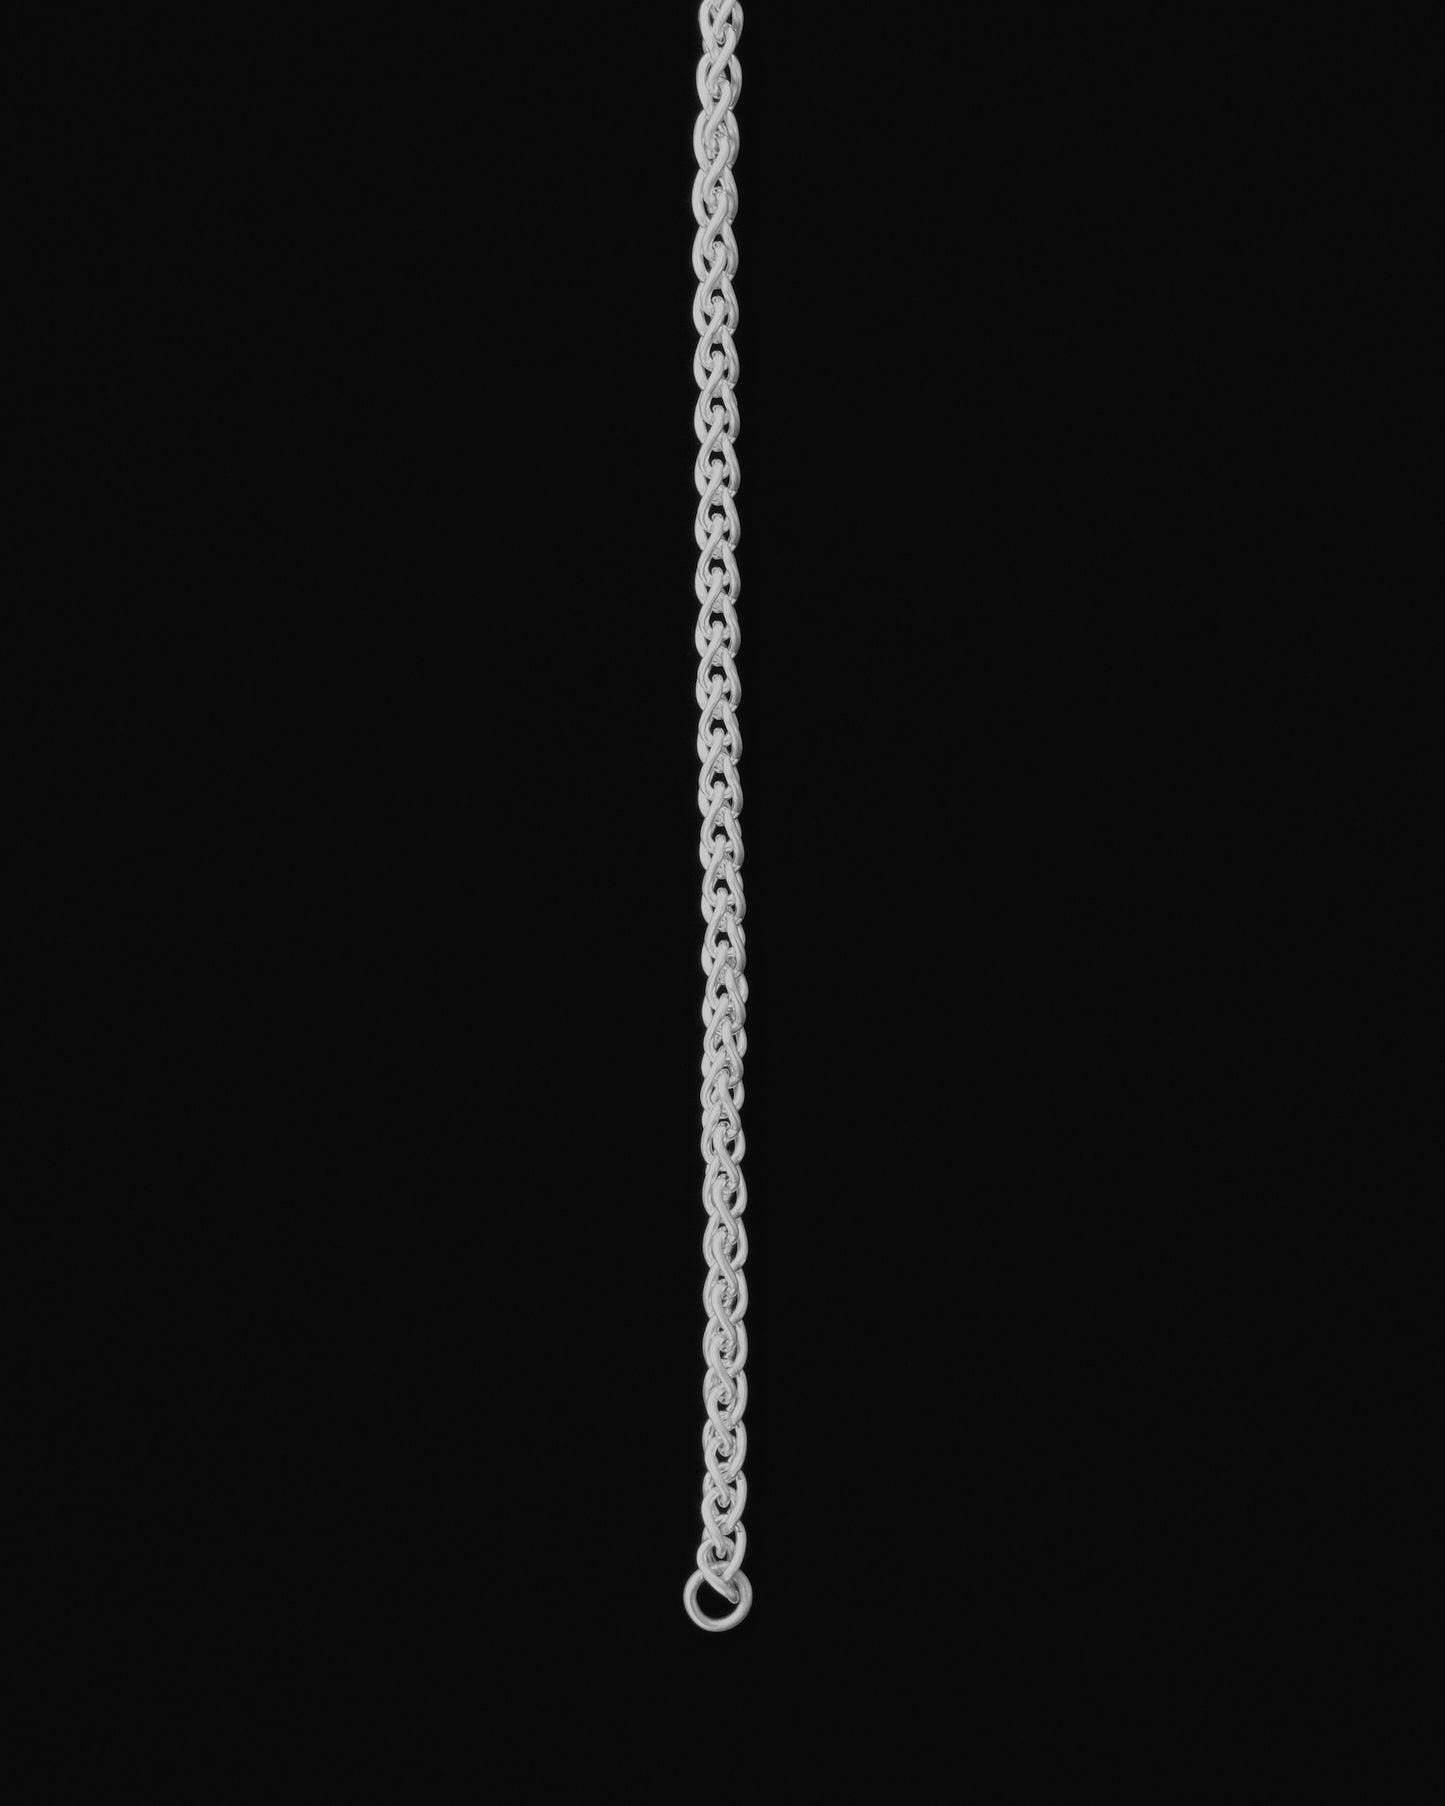 Tiana Marie Combes Riding Chain Anklet in Sterling Silver.